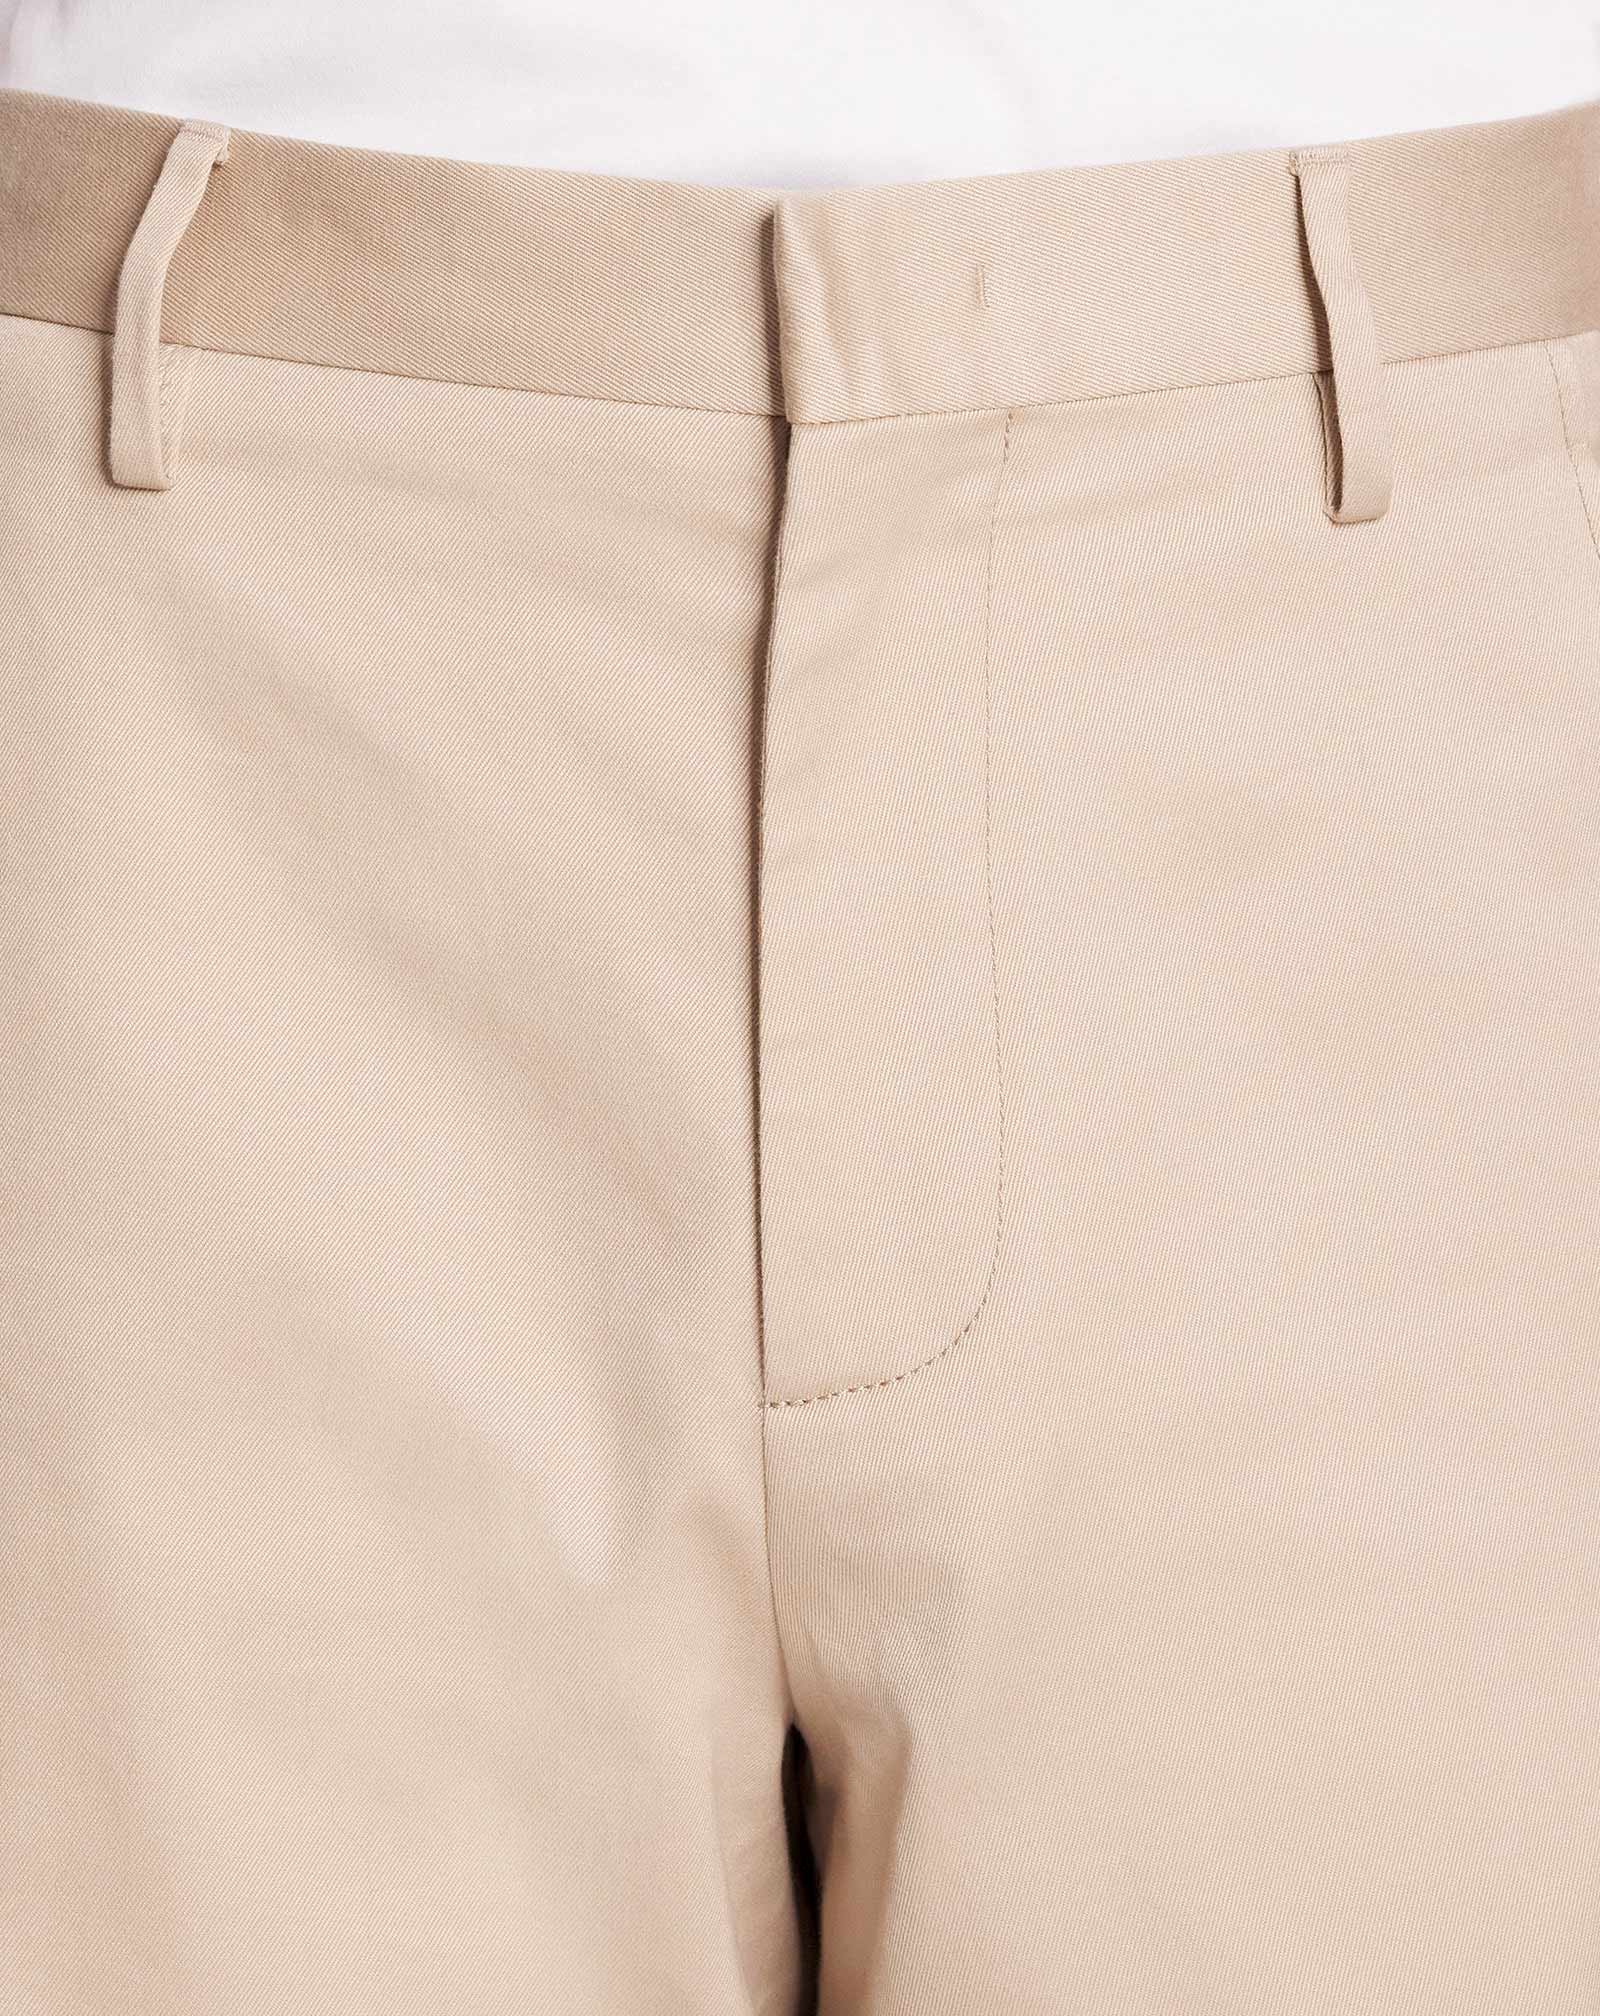 Twisted chinos